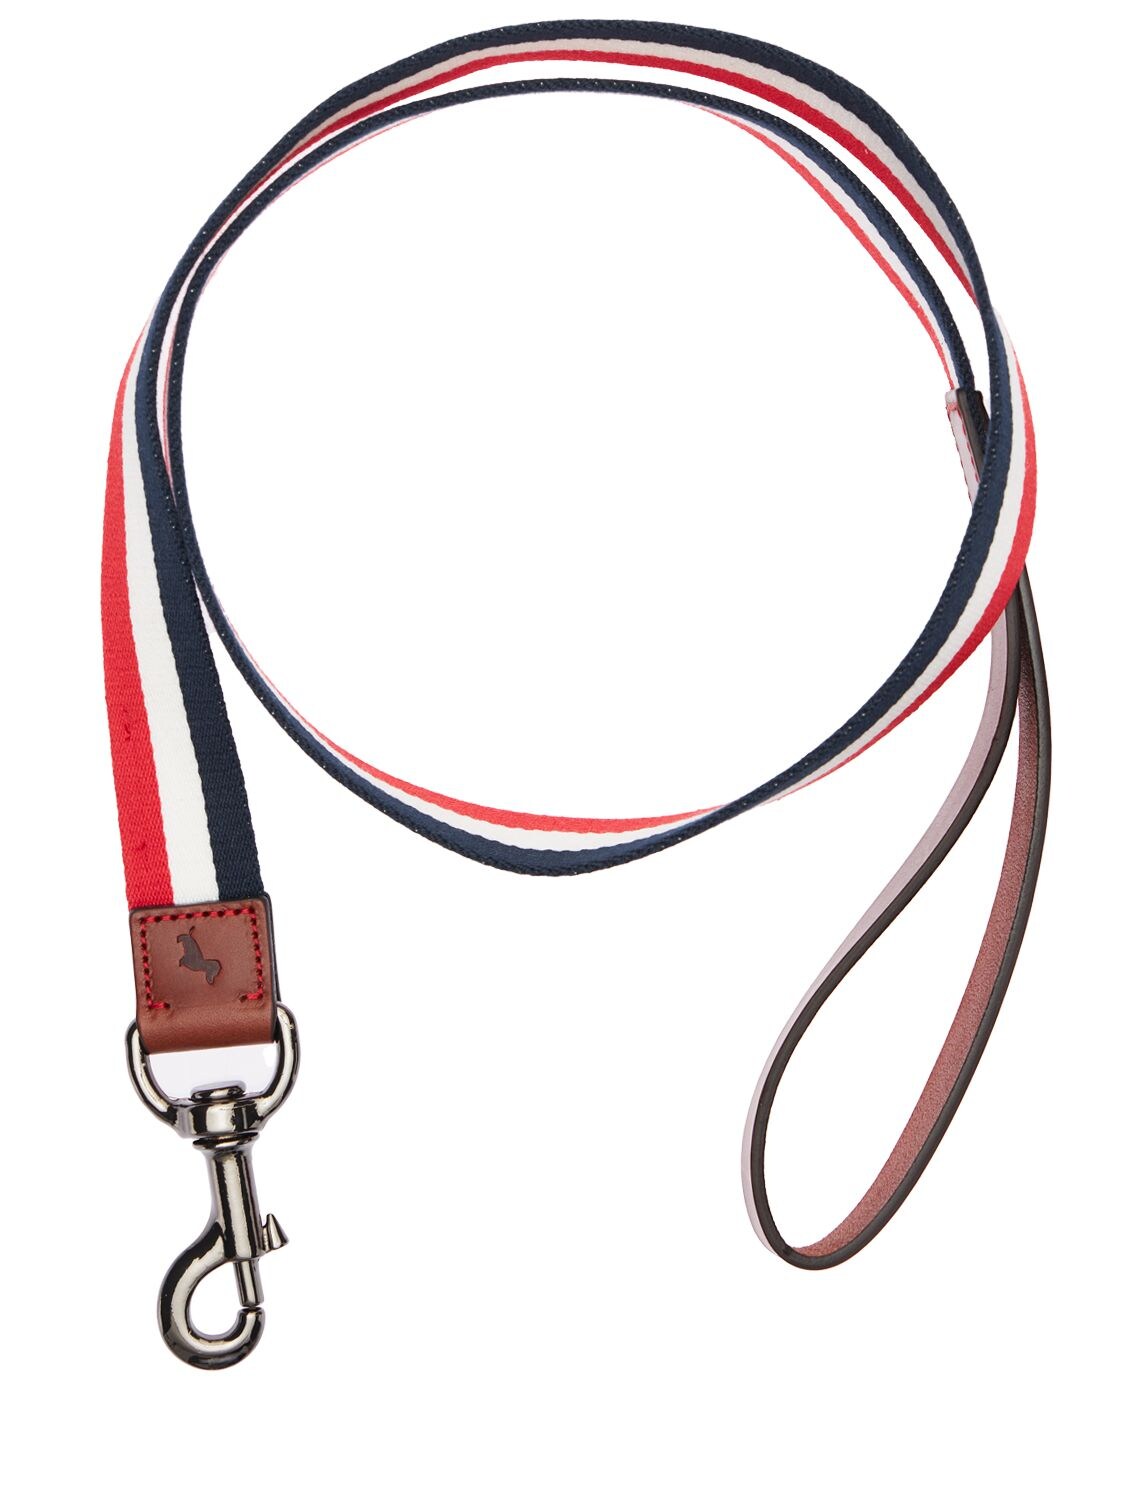 MONCLER MULTICOLOR TAPE LEASH W/ LEATHER DETAILS,74IYIU006-NZKW0